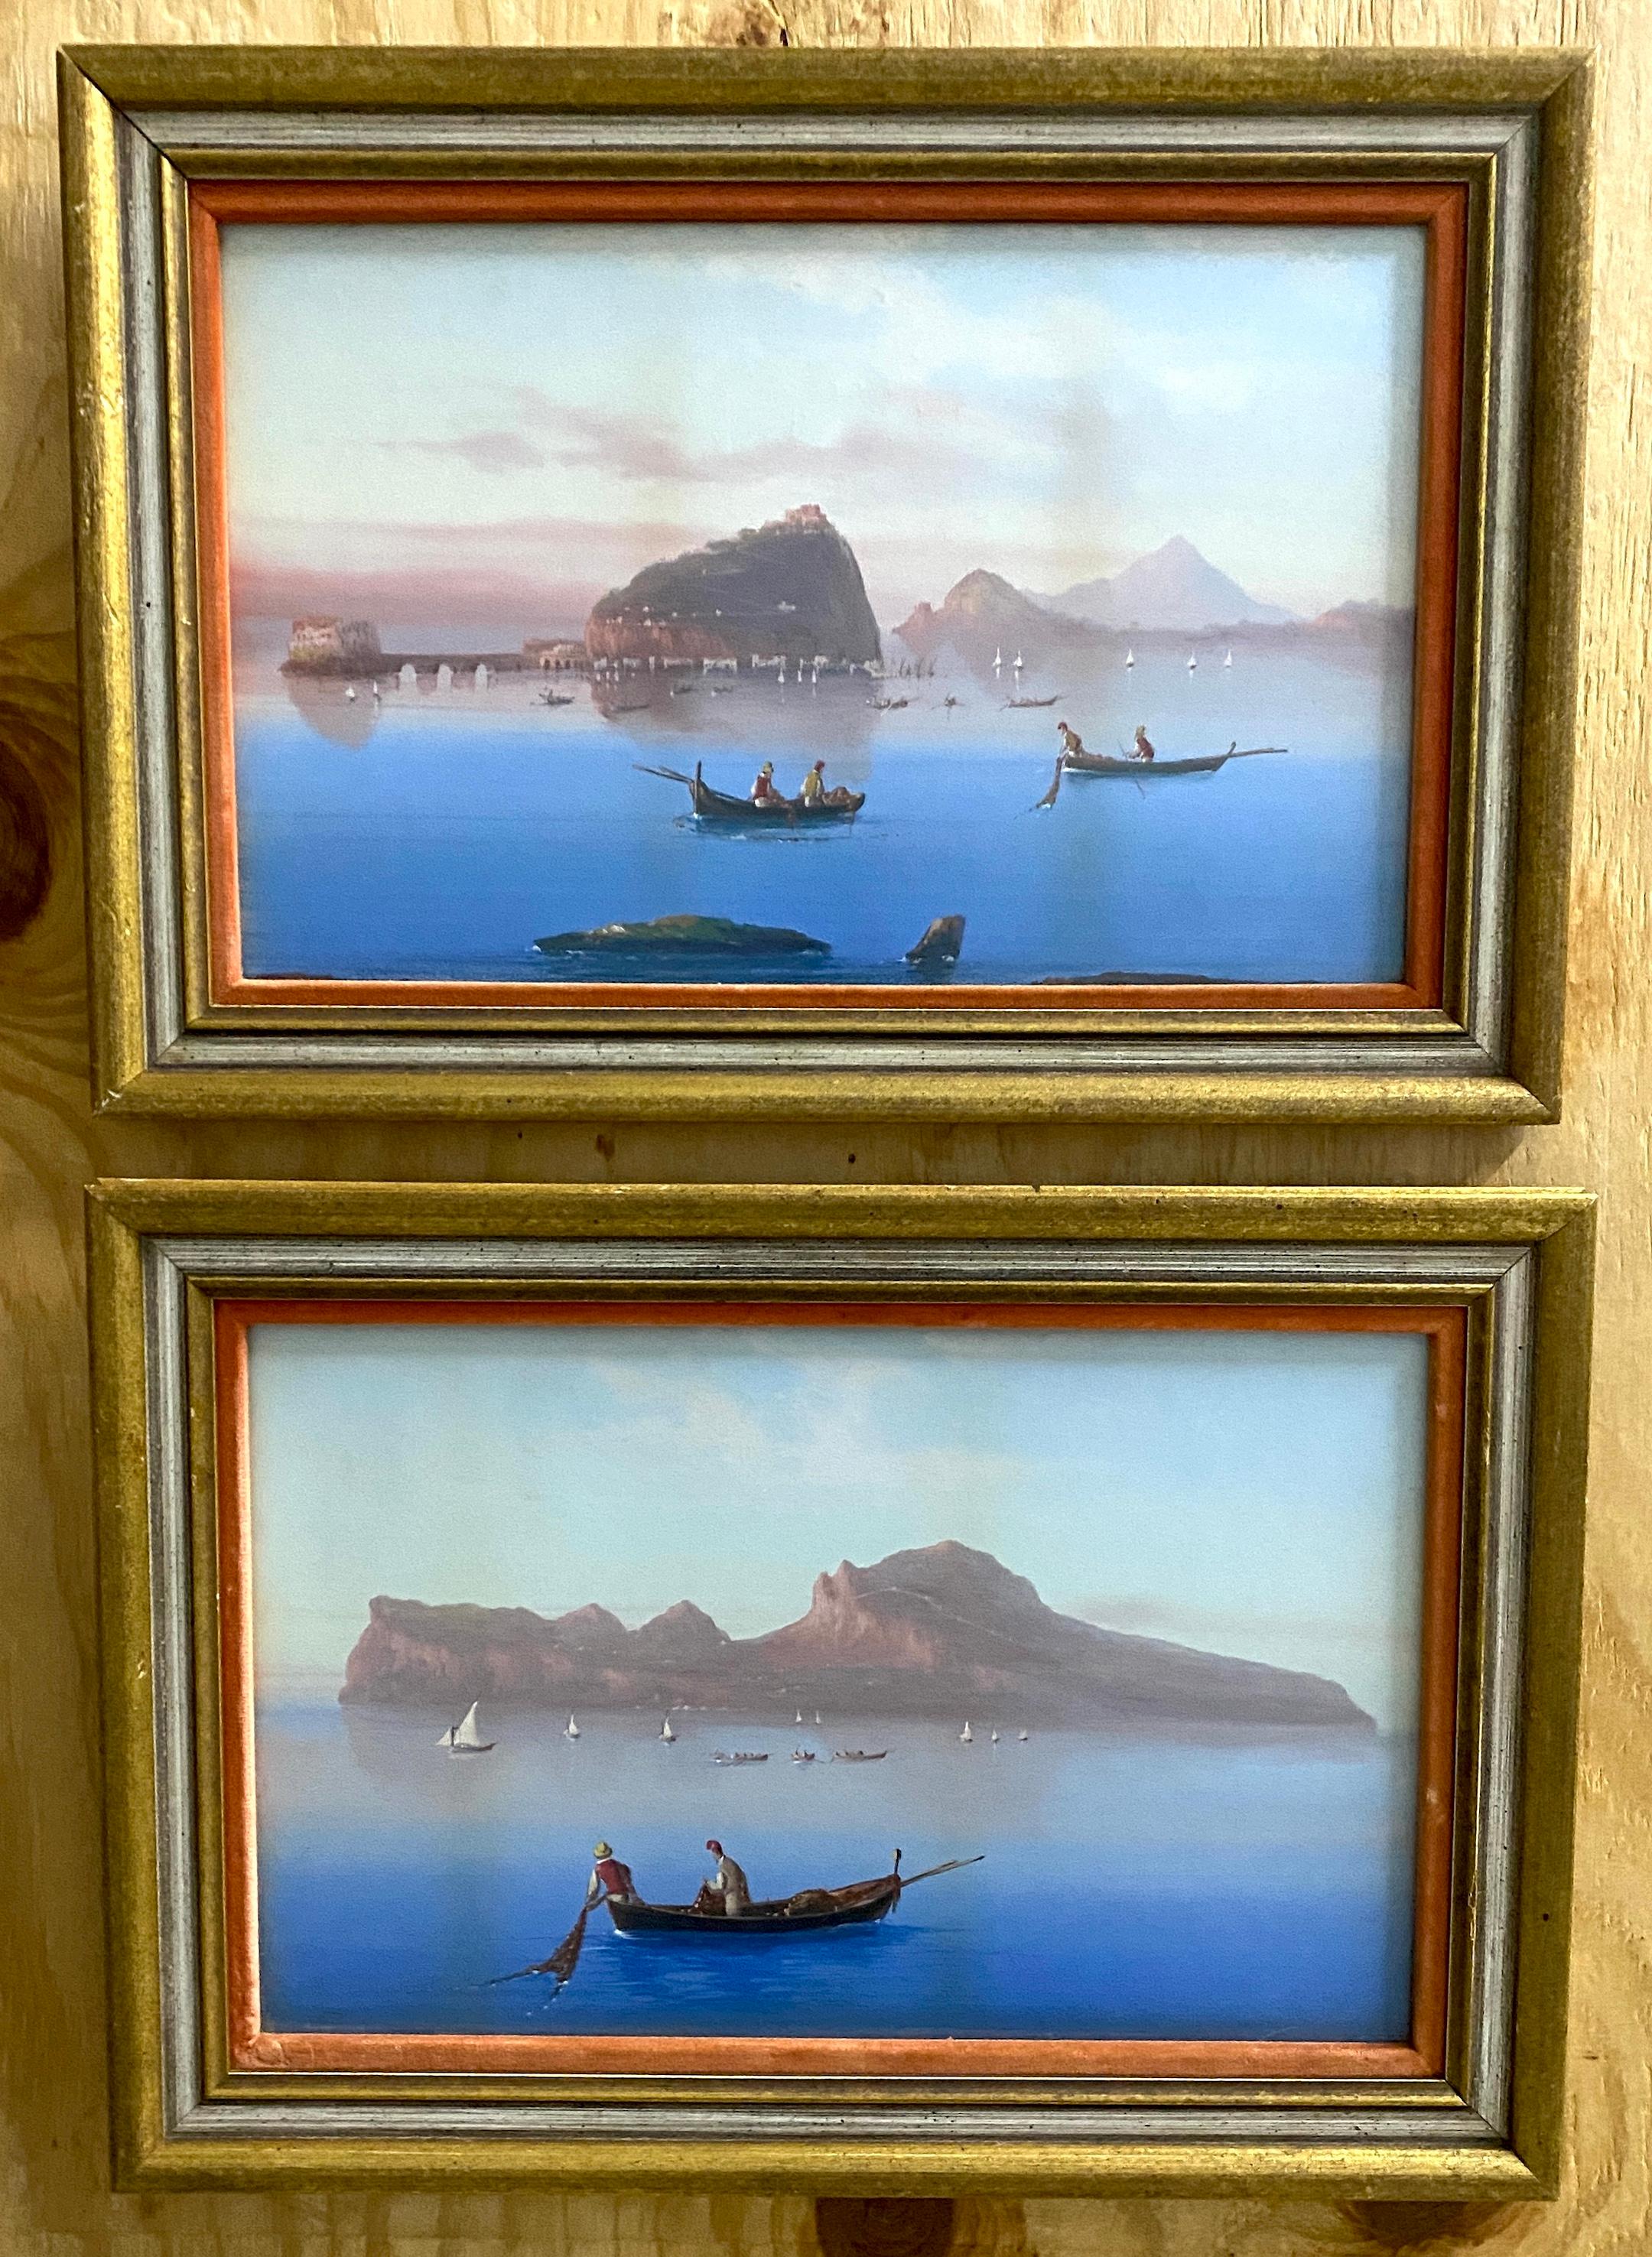 Pair of Neapolitan Grand Tour Gouaches Naples Bay & Mount Vesuvius- Larger
Italy, Circa 1850s

A captivating Pair of Neapolitan Grand Tour Paintings, originating from Italy in the 1850s. These exquisite artworks offer stunning perspectives of the